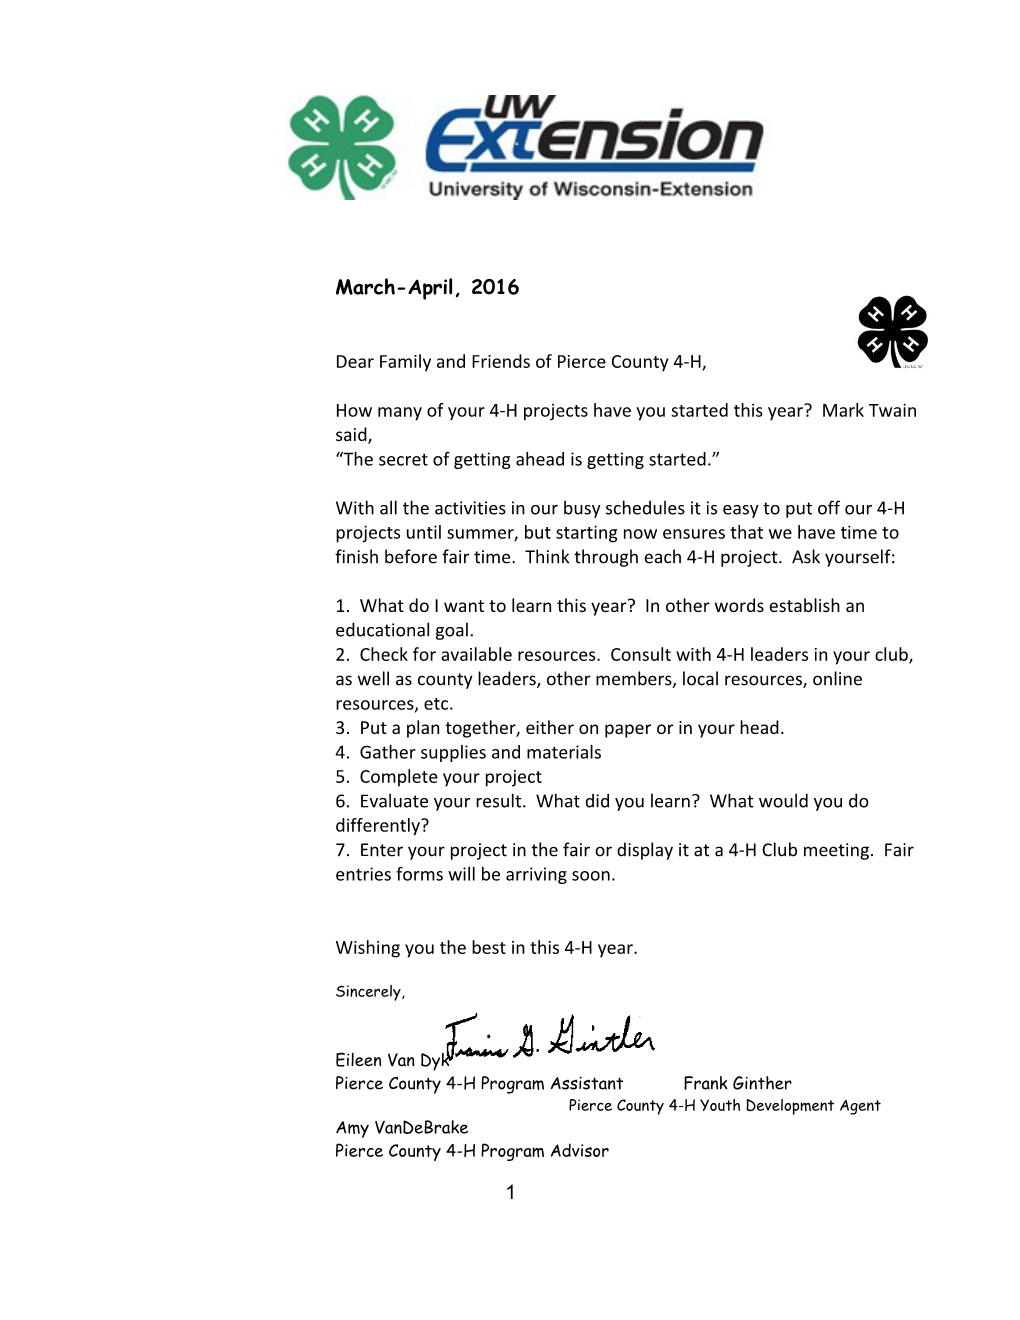 Dear Family and Friends of Pierce County 4-H